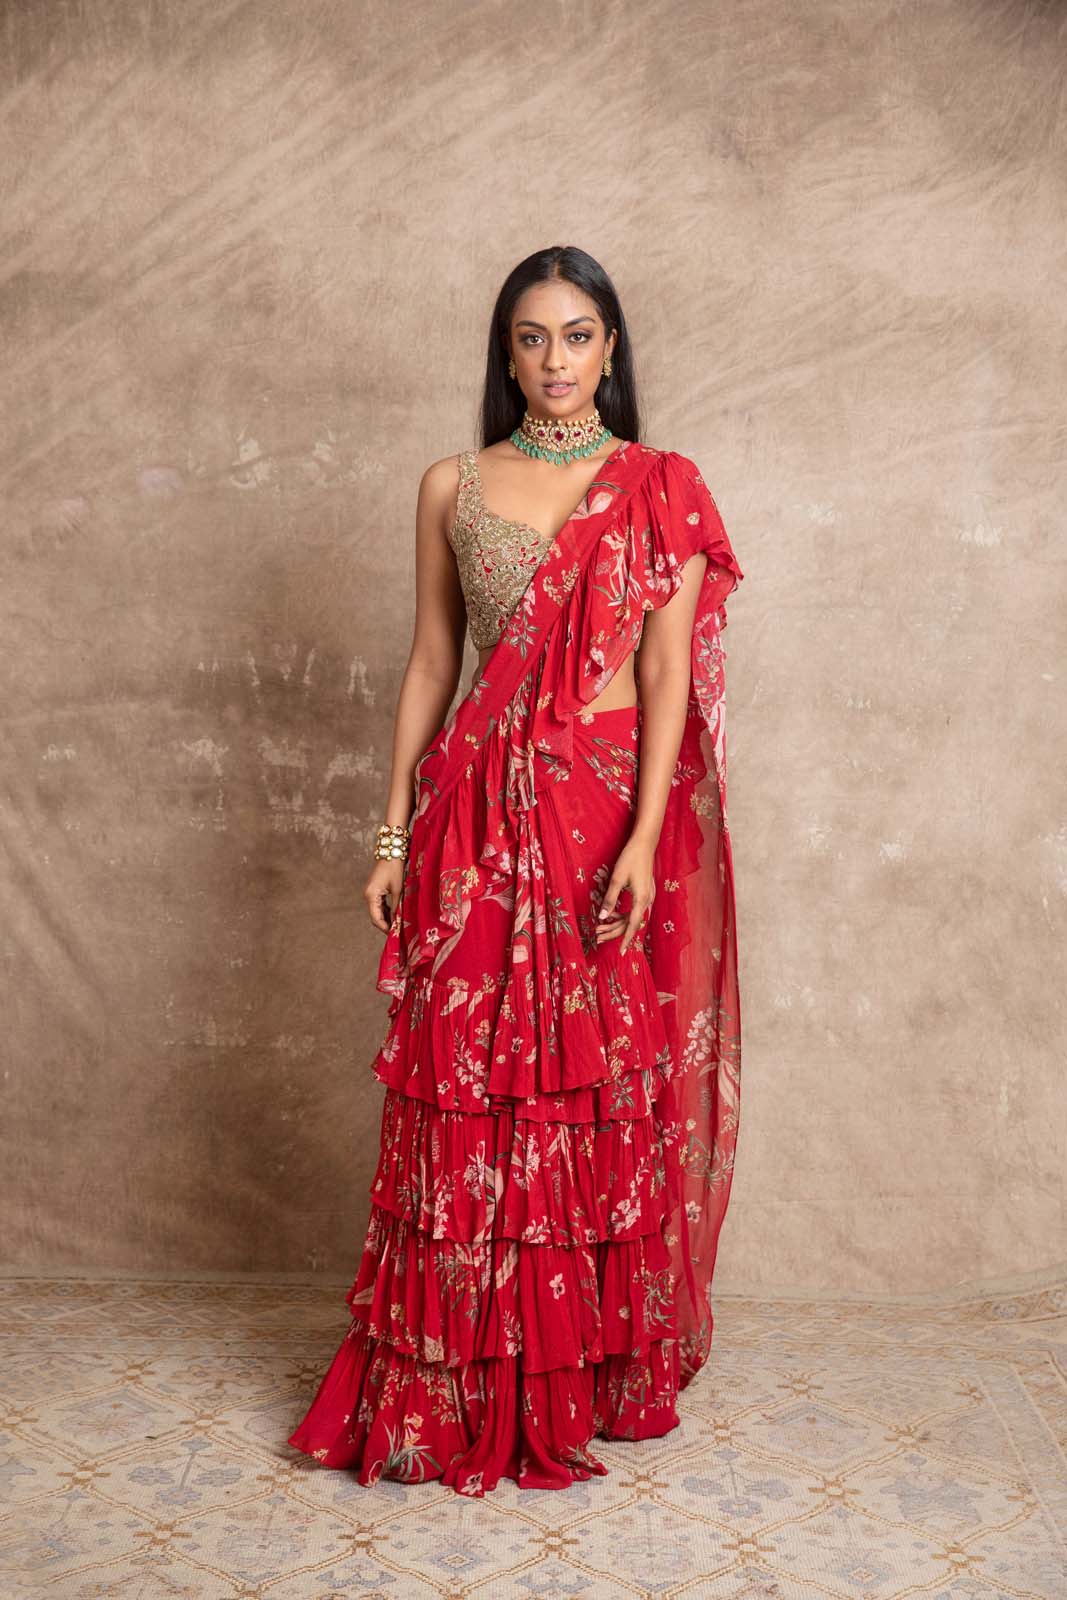 Shop Latest Pre Stitched Foral Print Cherry Red Saree Online